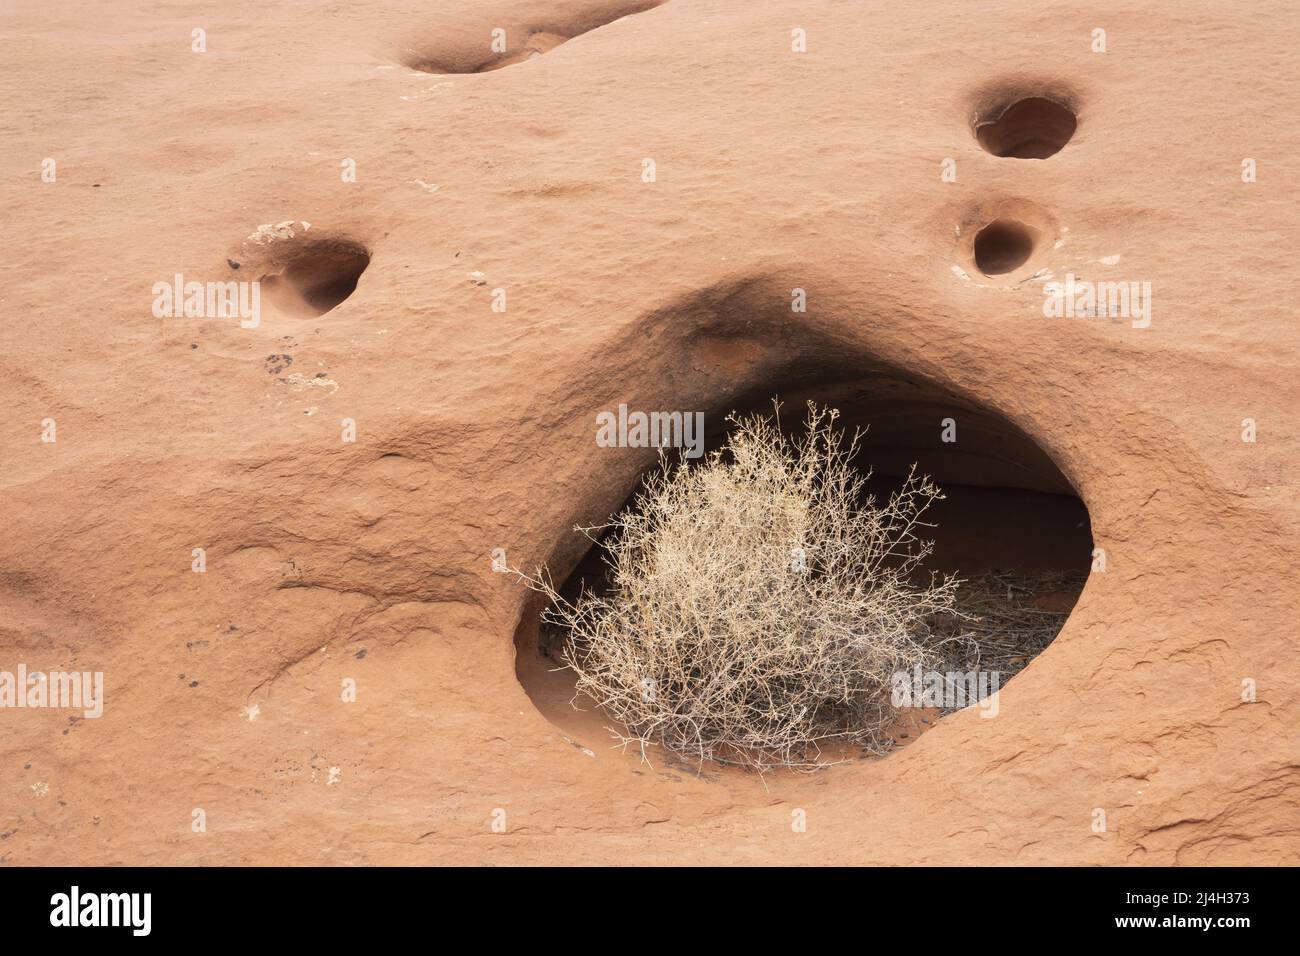 Tumbleweed growing in pocket formed in sandstone, Glen Canyon National Recreation Area, Kane County, Utah, USA Stock Photo